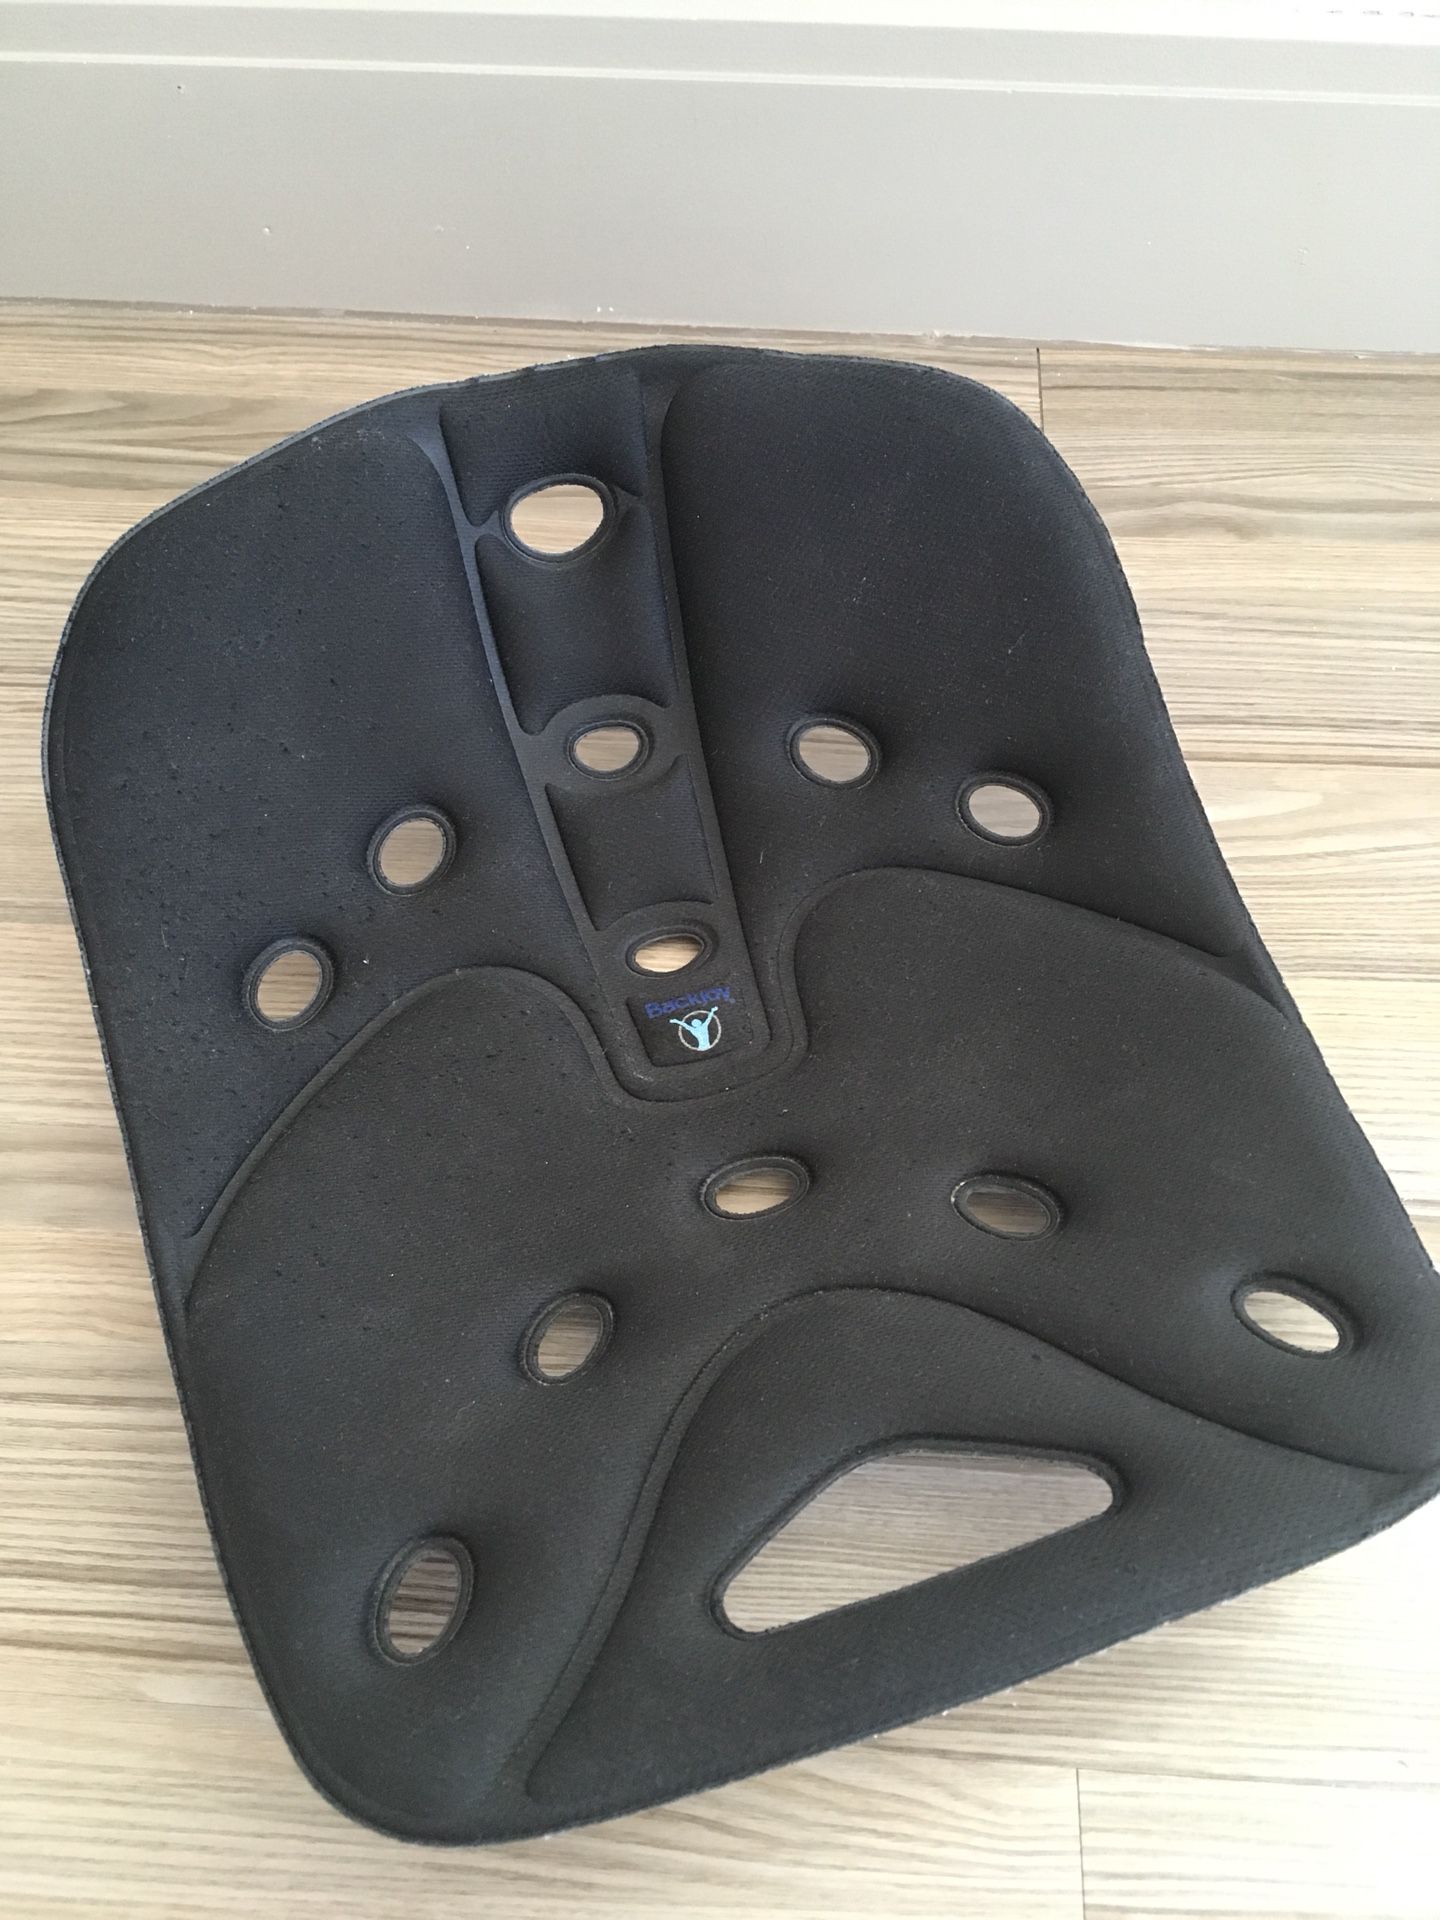 Backjoy Posture Seat Pad for Sale in Bothell, WA - OfferUp